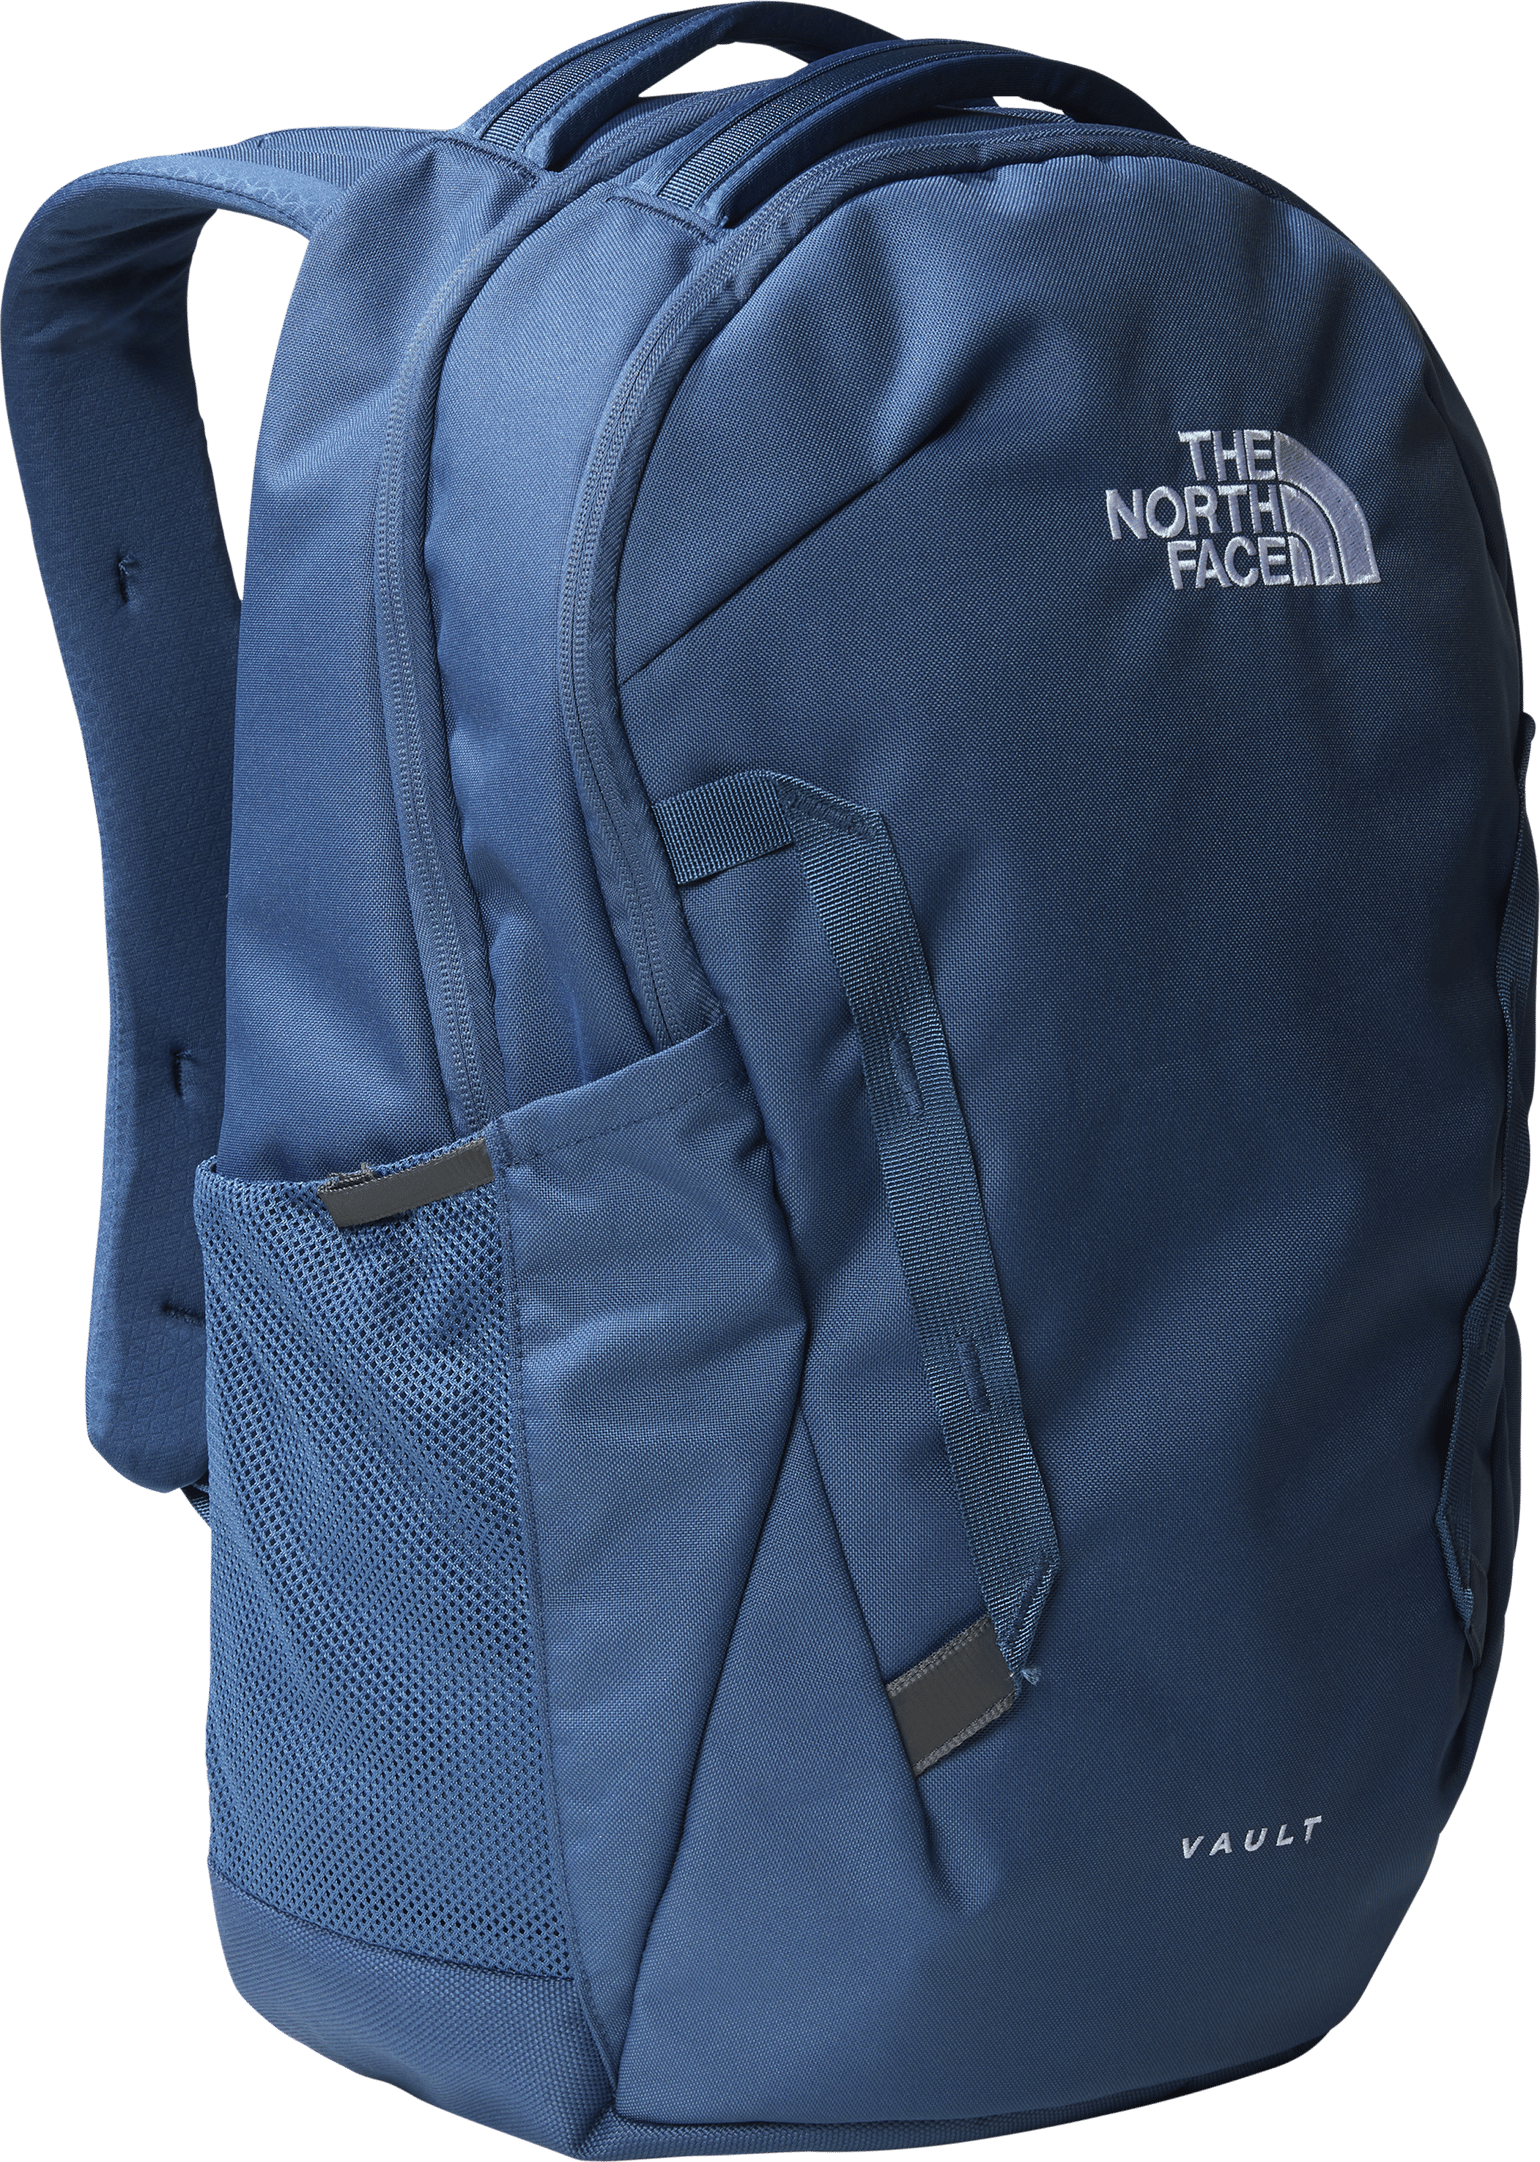 The North Face Vault Shady Blue/Tnf White